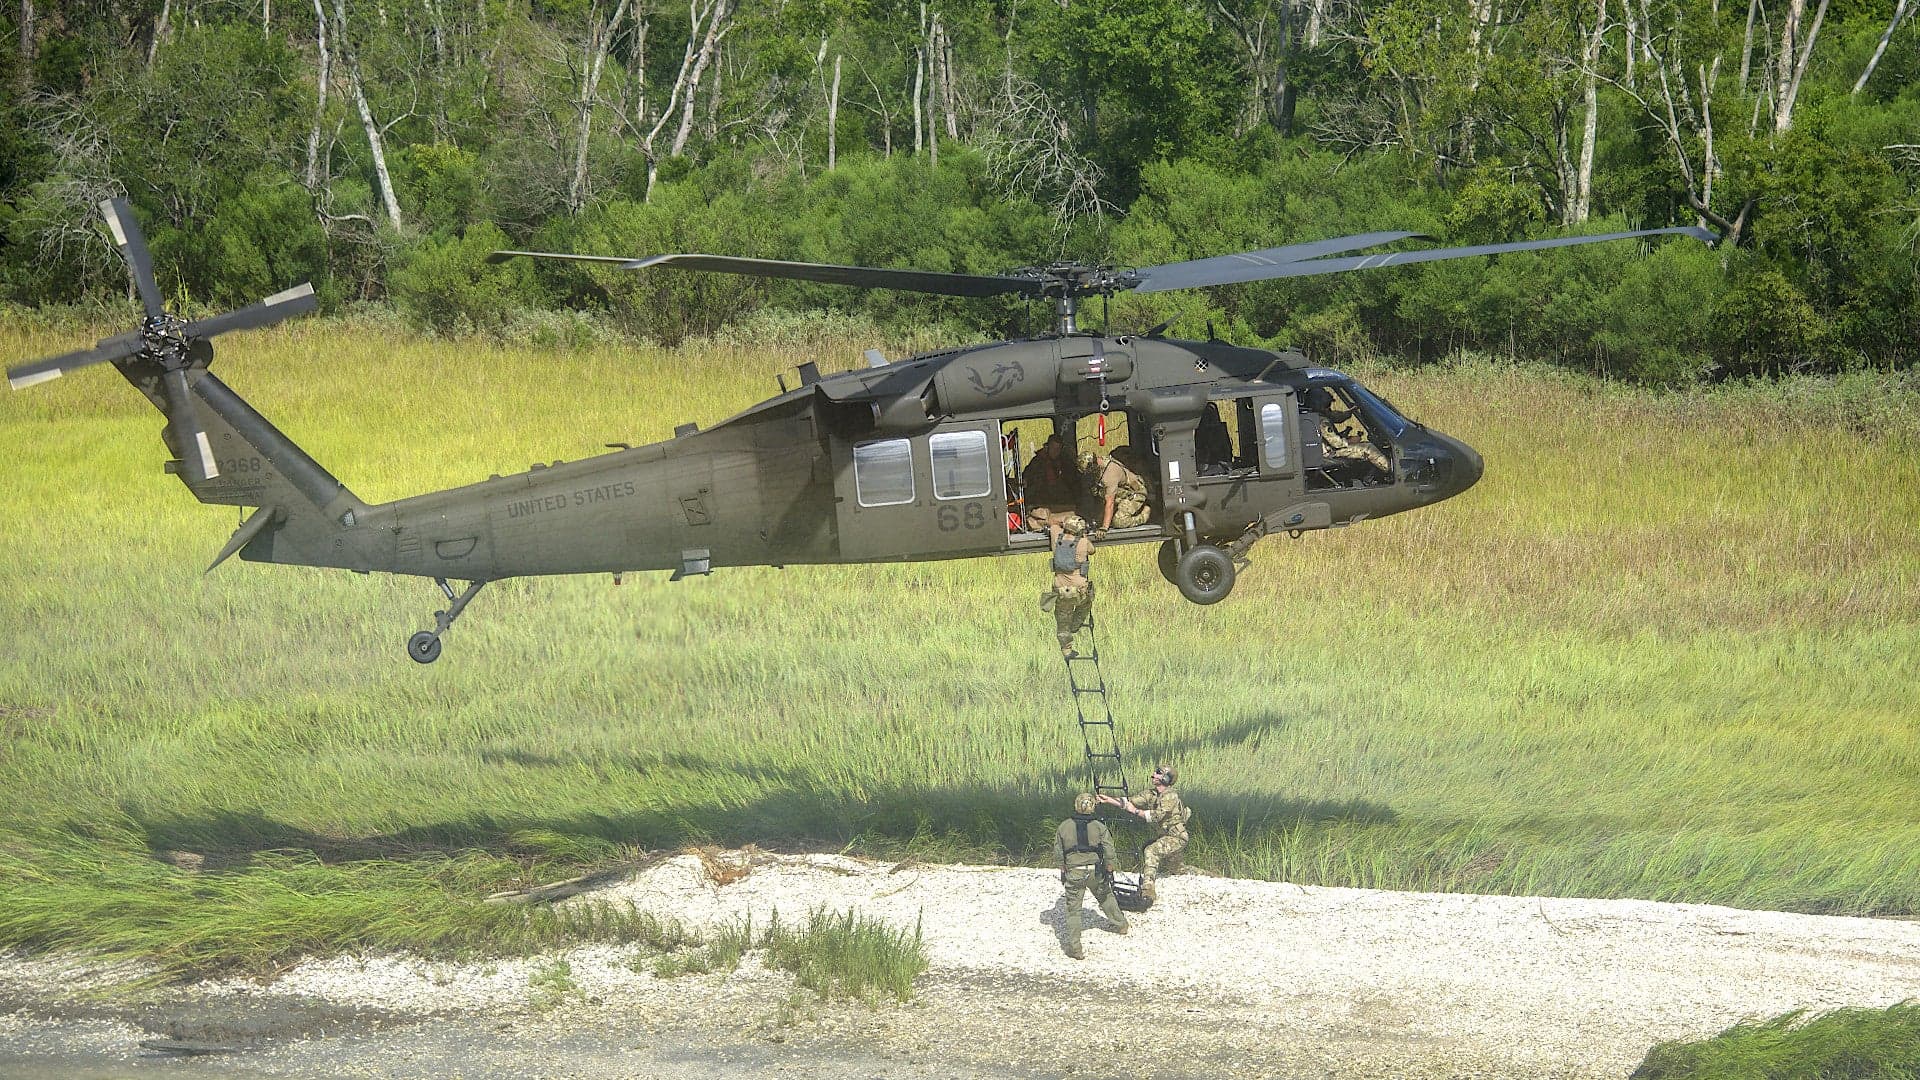 This Is Our Best Look Yet At The Elite FBI Hostage Rescue Team’s UH-60 Black Hawks